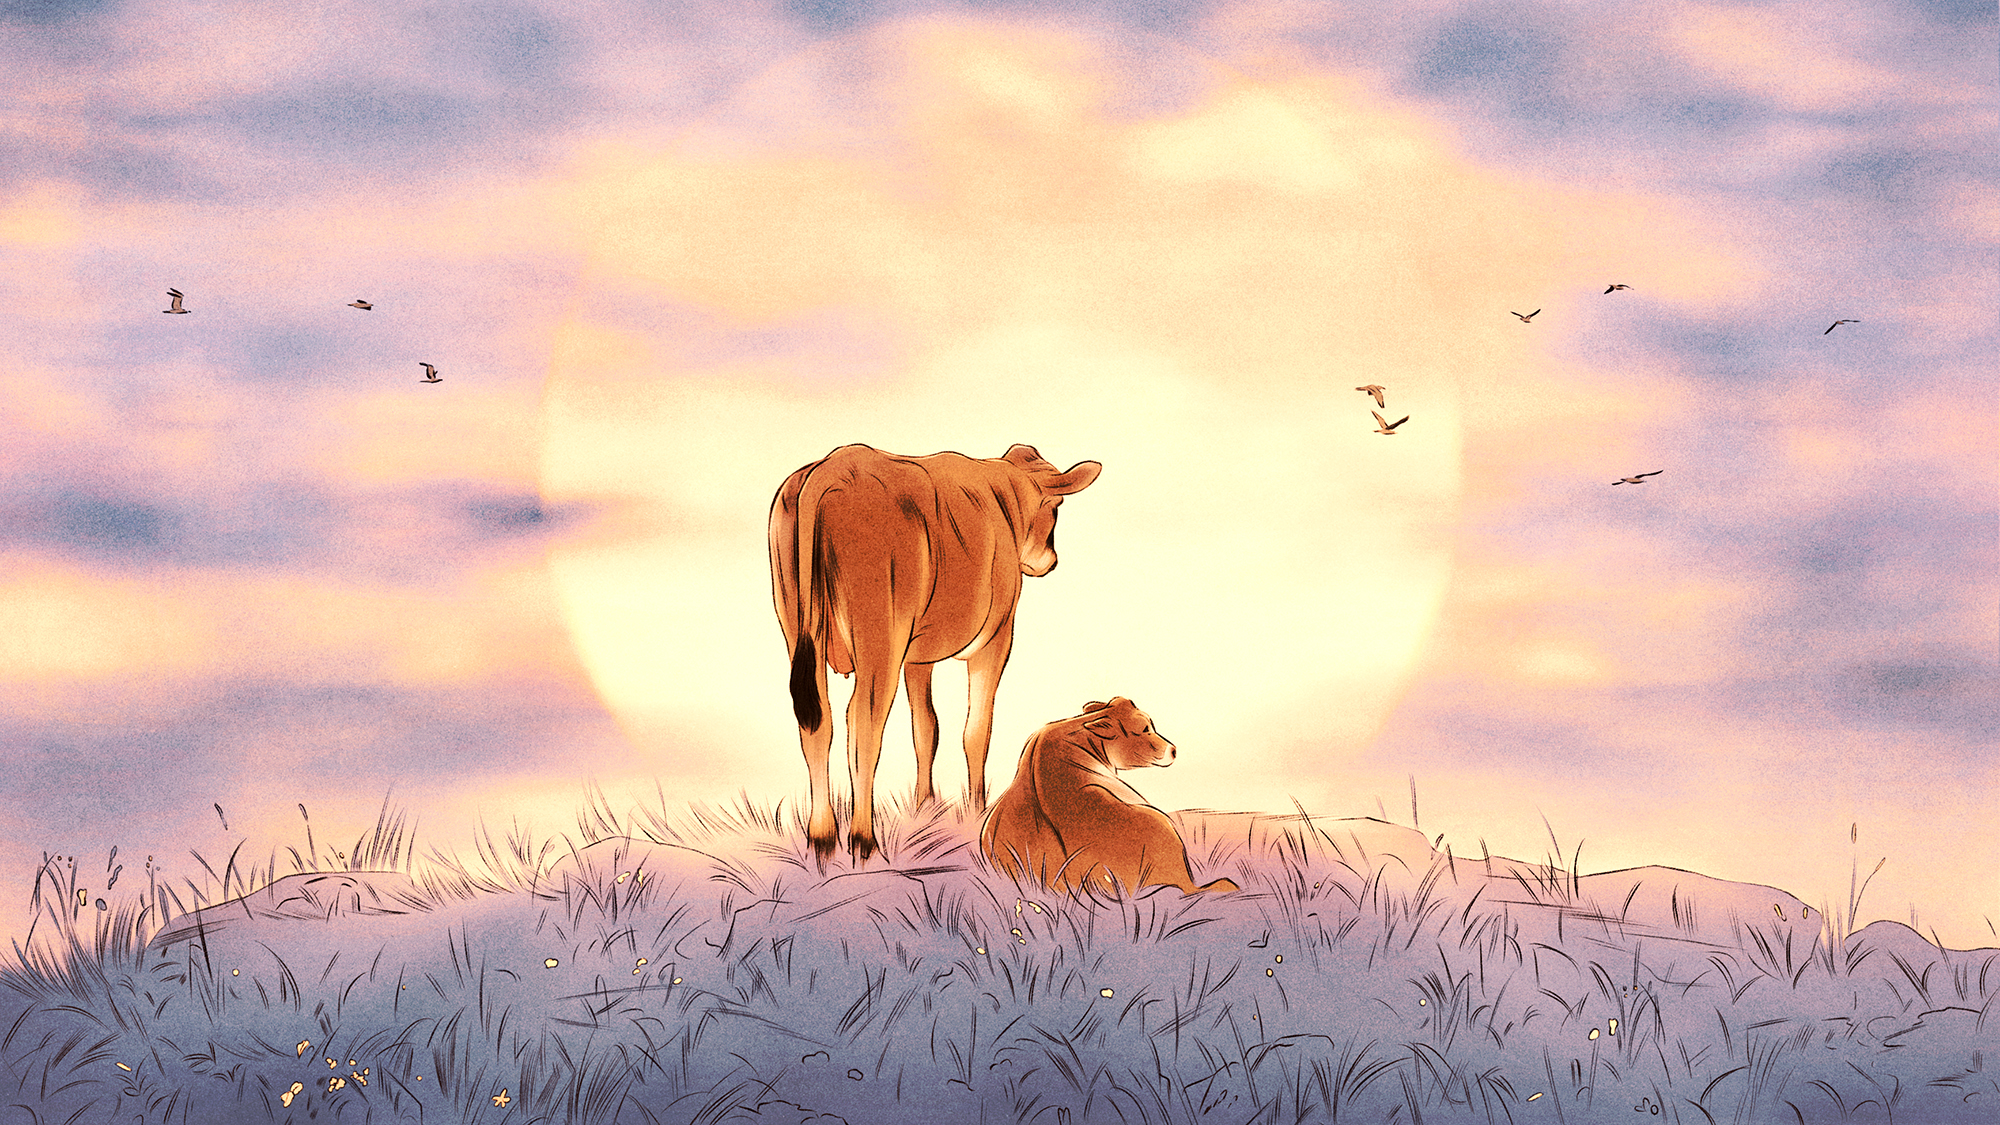 Two light brown cows standing on a grassy hill against a yellow sun and purple clouds. Illustration.